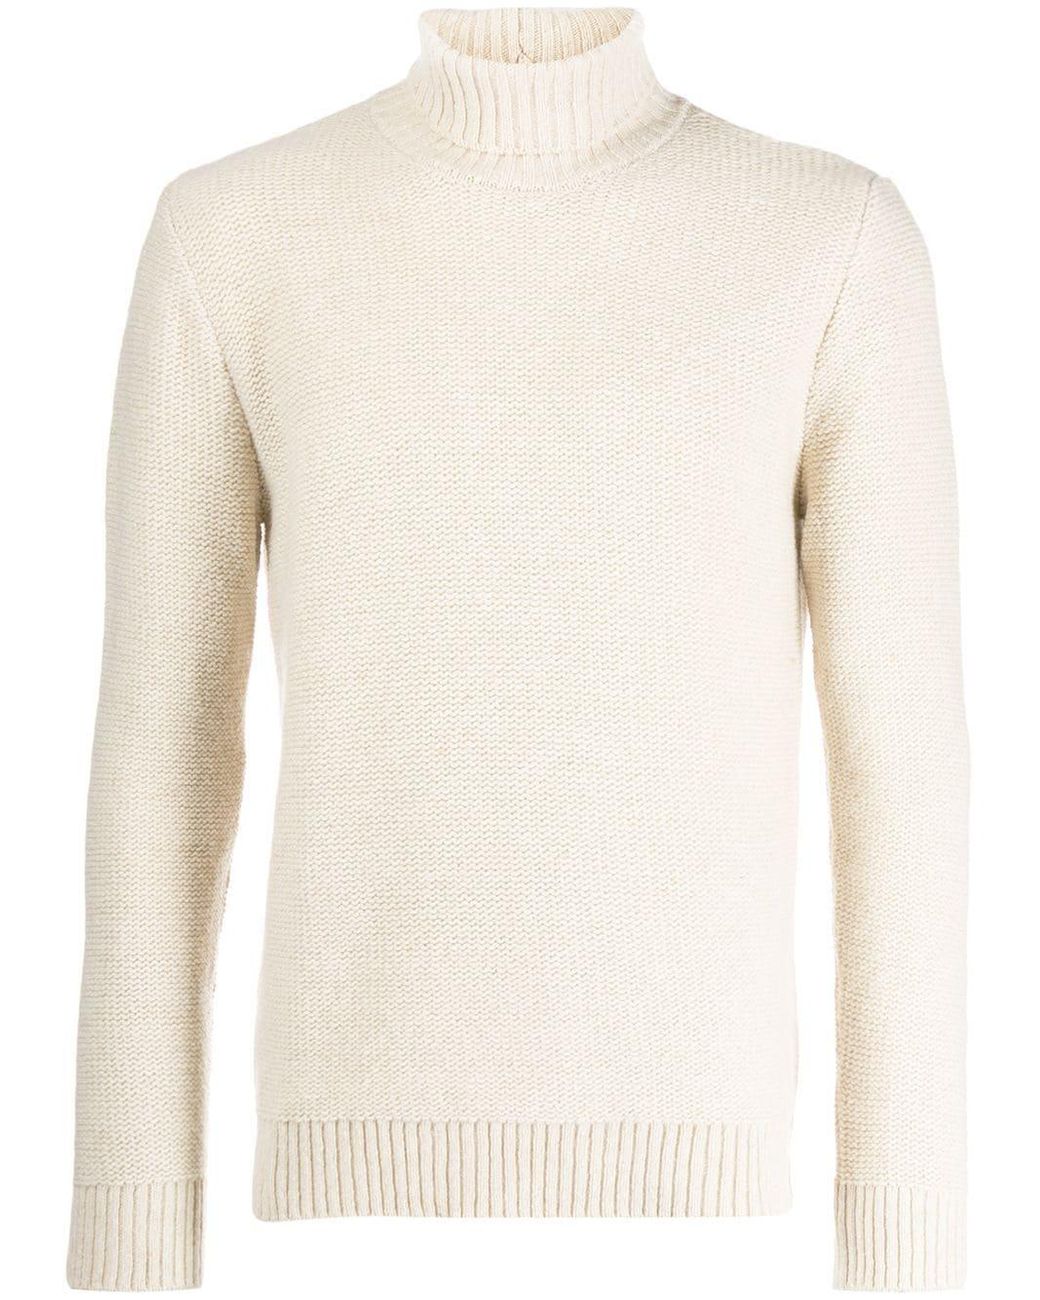 Eleventy Wool Classic Roll-neck Sweater in Natural for Men - Lyst